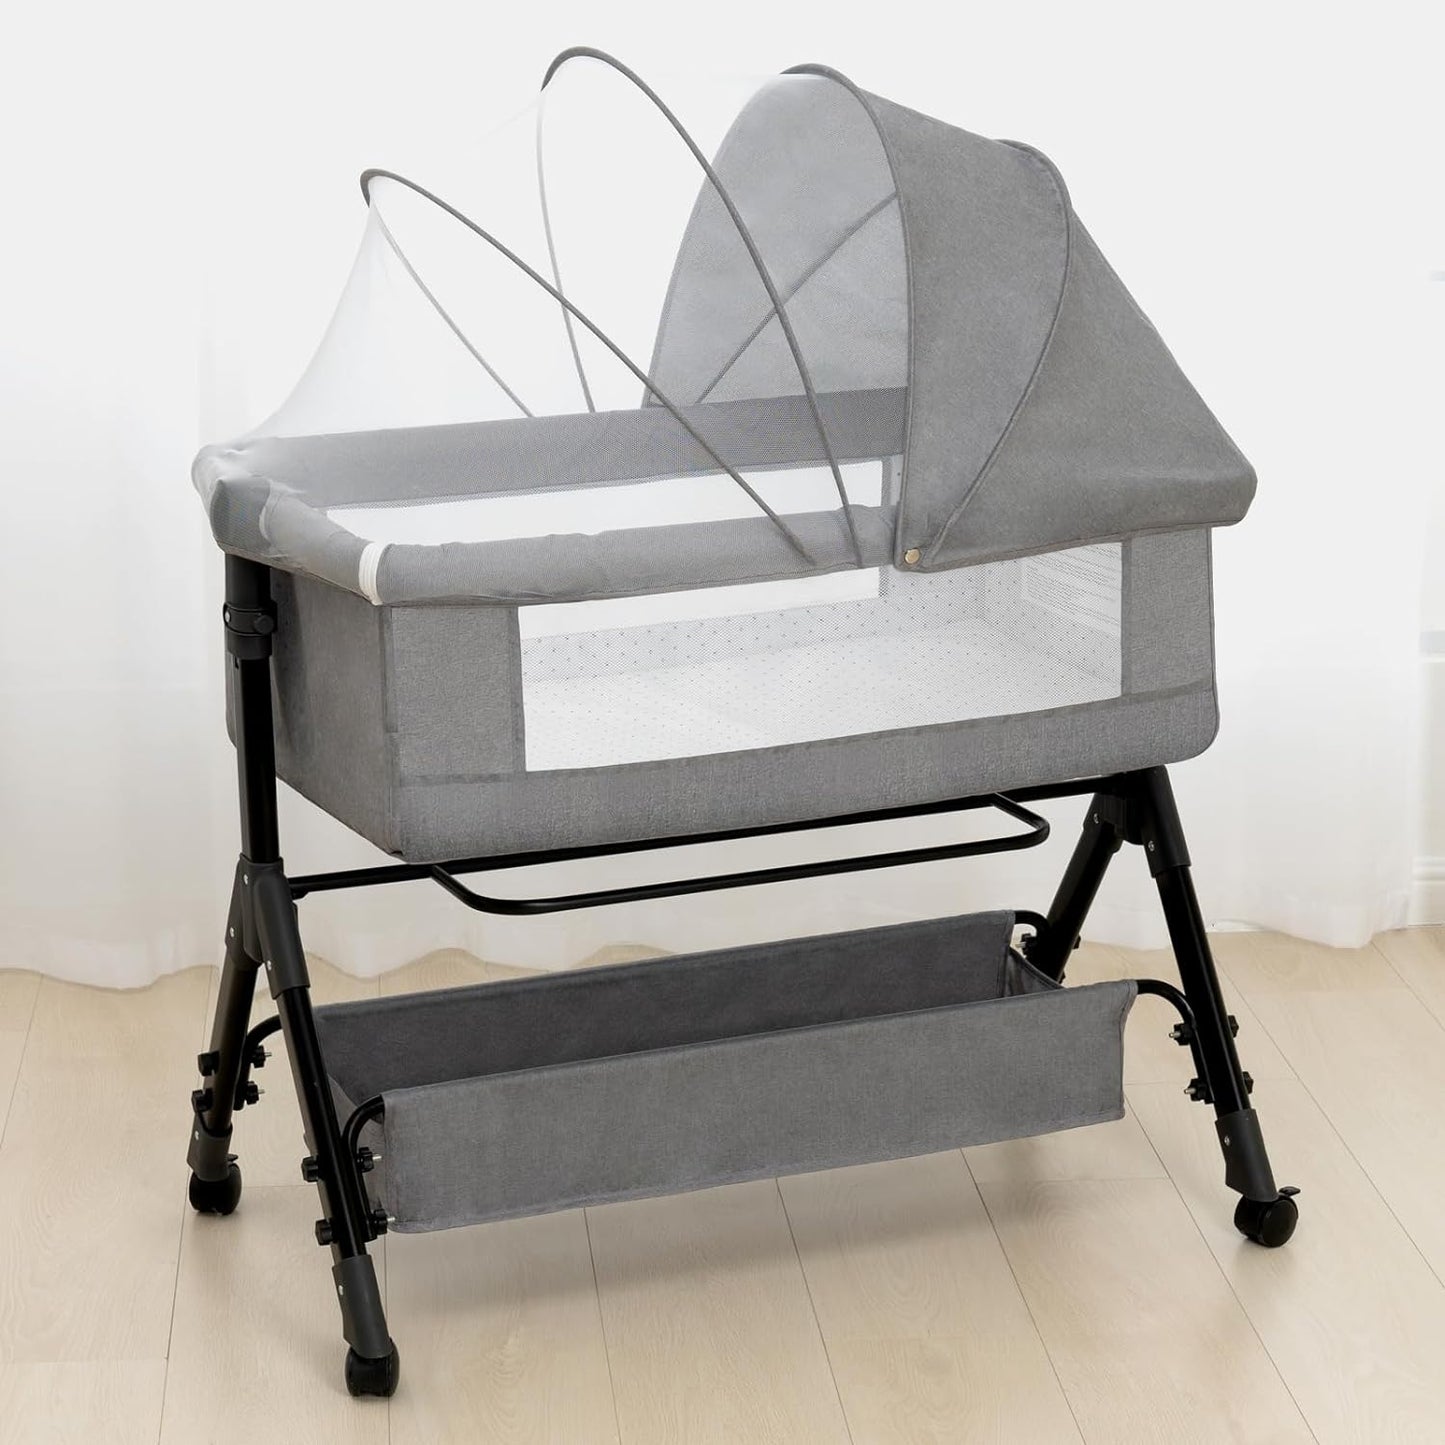 Foalom 3 in 1 Baby Bassinet, Bedside Sleeper with Storage Basket and Wheels, Bedside Crib for Baby, Adjustable and Movable Baby Cradle with Mosquito Nets, Easy Folding Baby Bed (Grey)